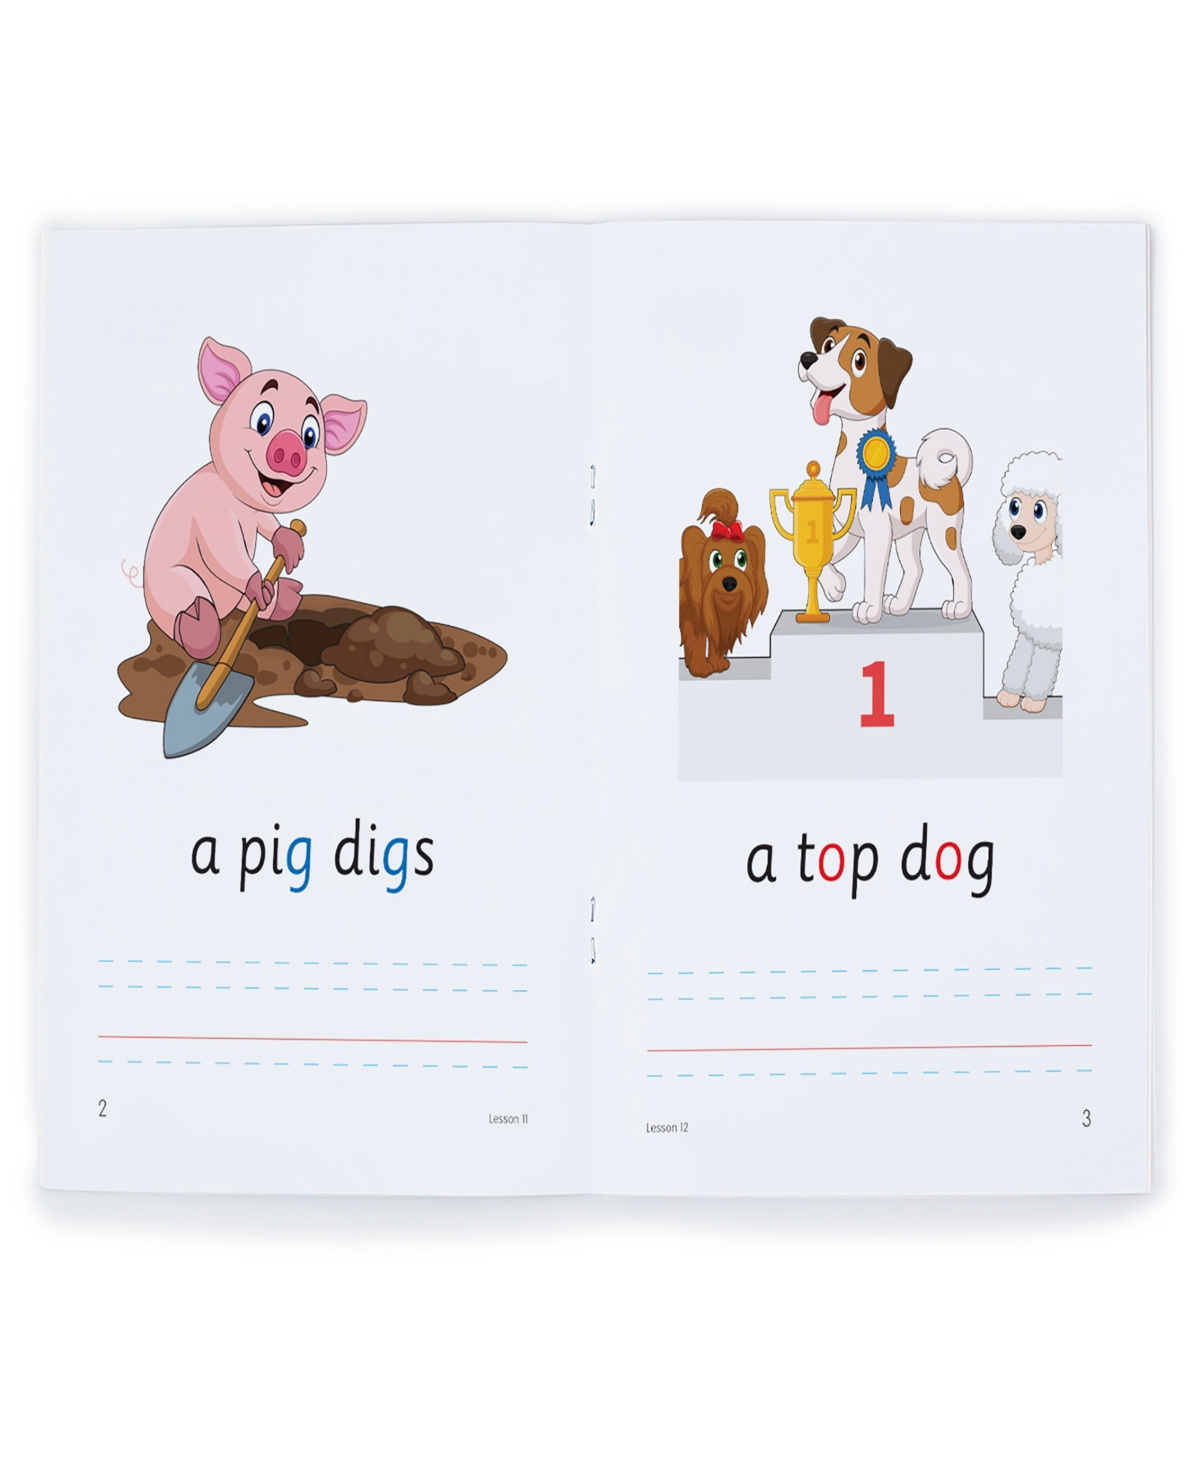 Shop Junior Learning Read Write Decodables Set A In Multi